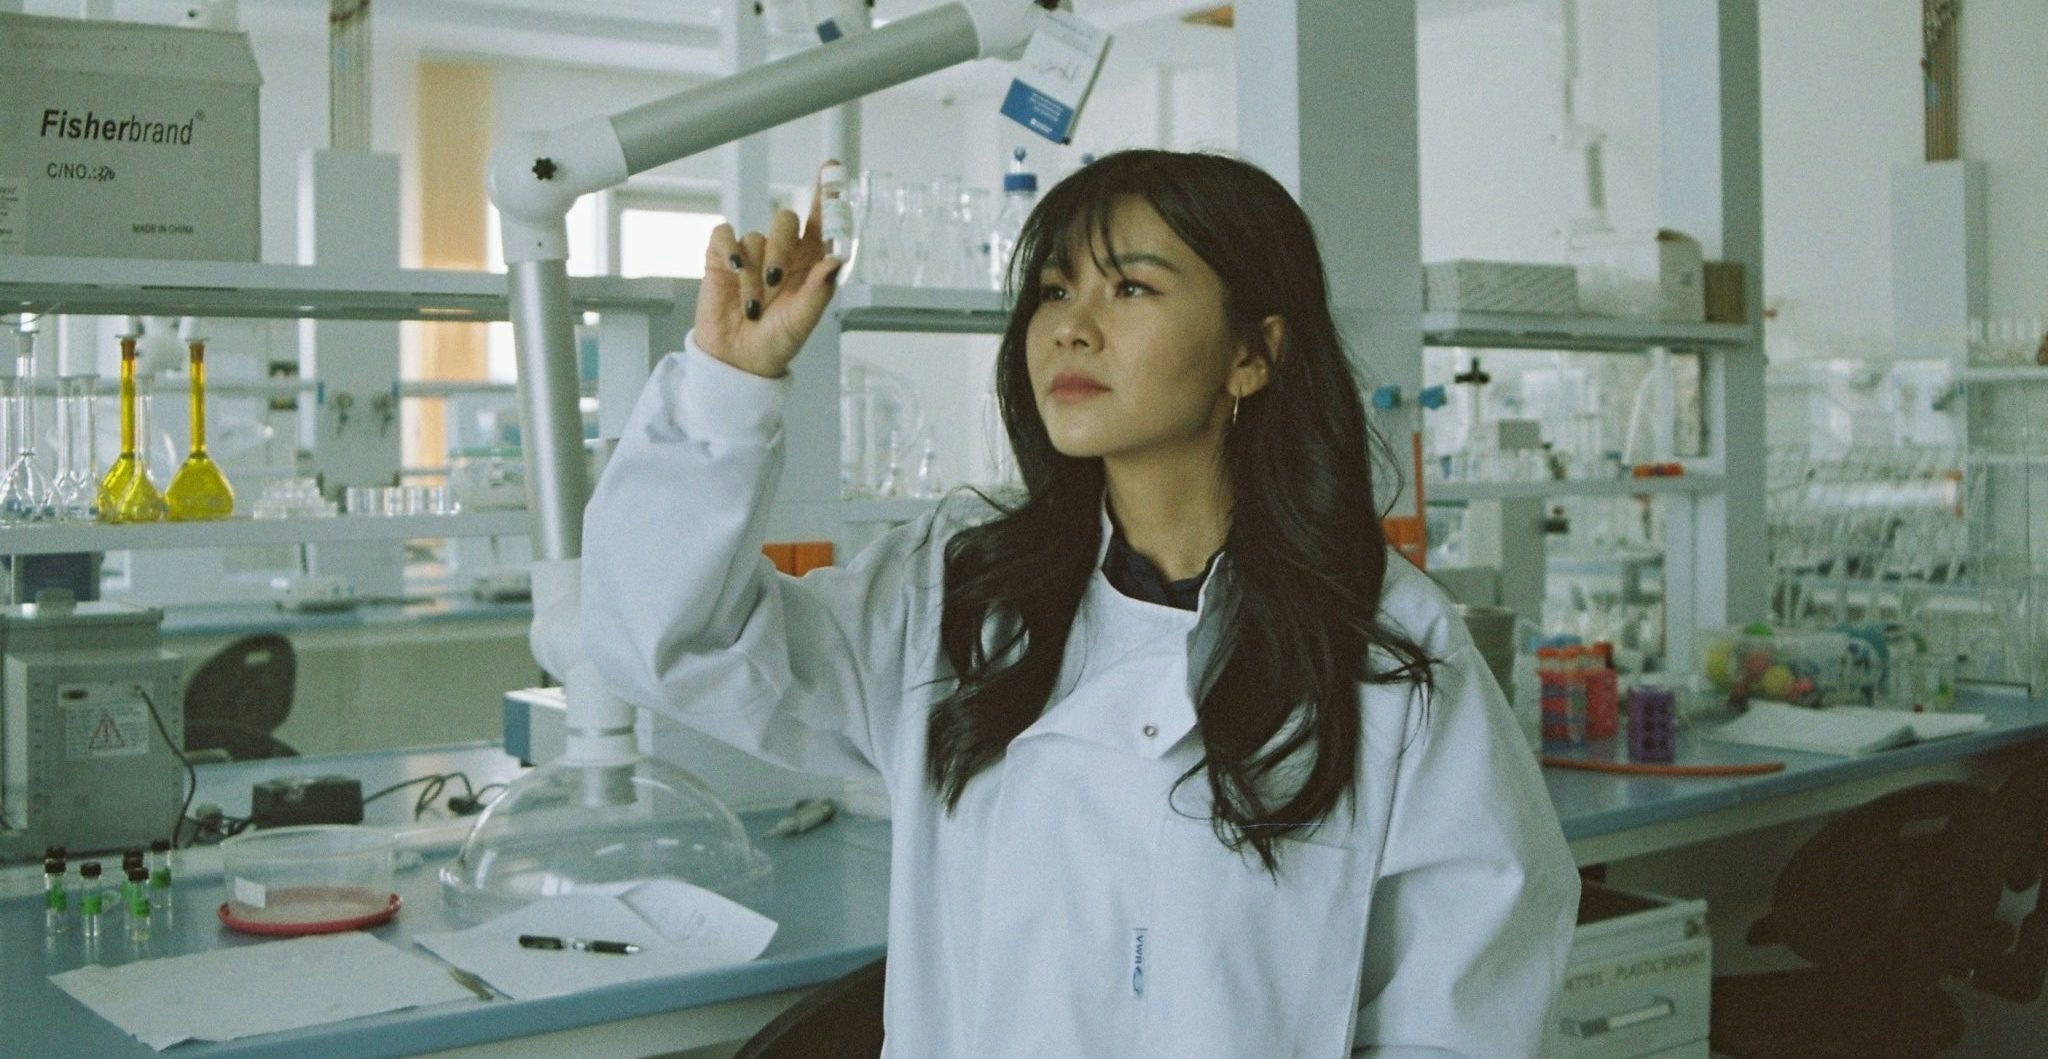 Stock image of a Scientist in a laboratory